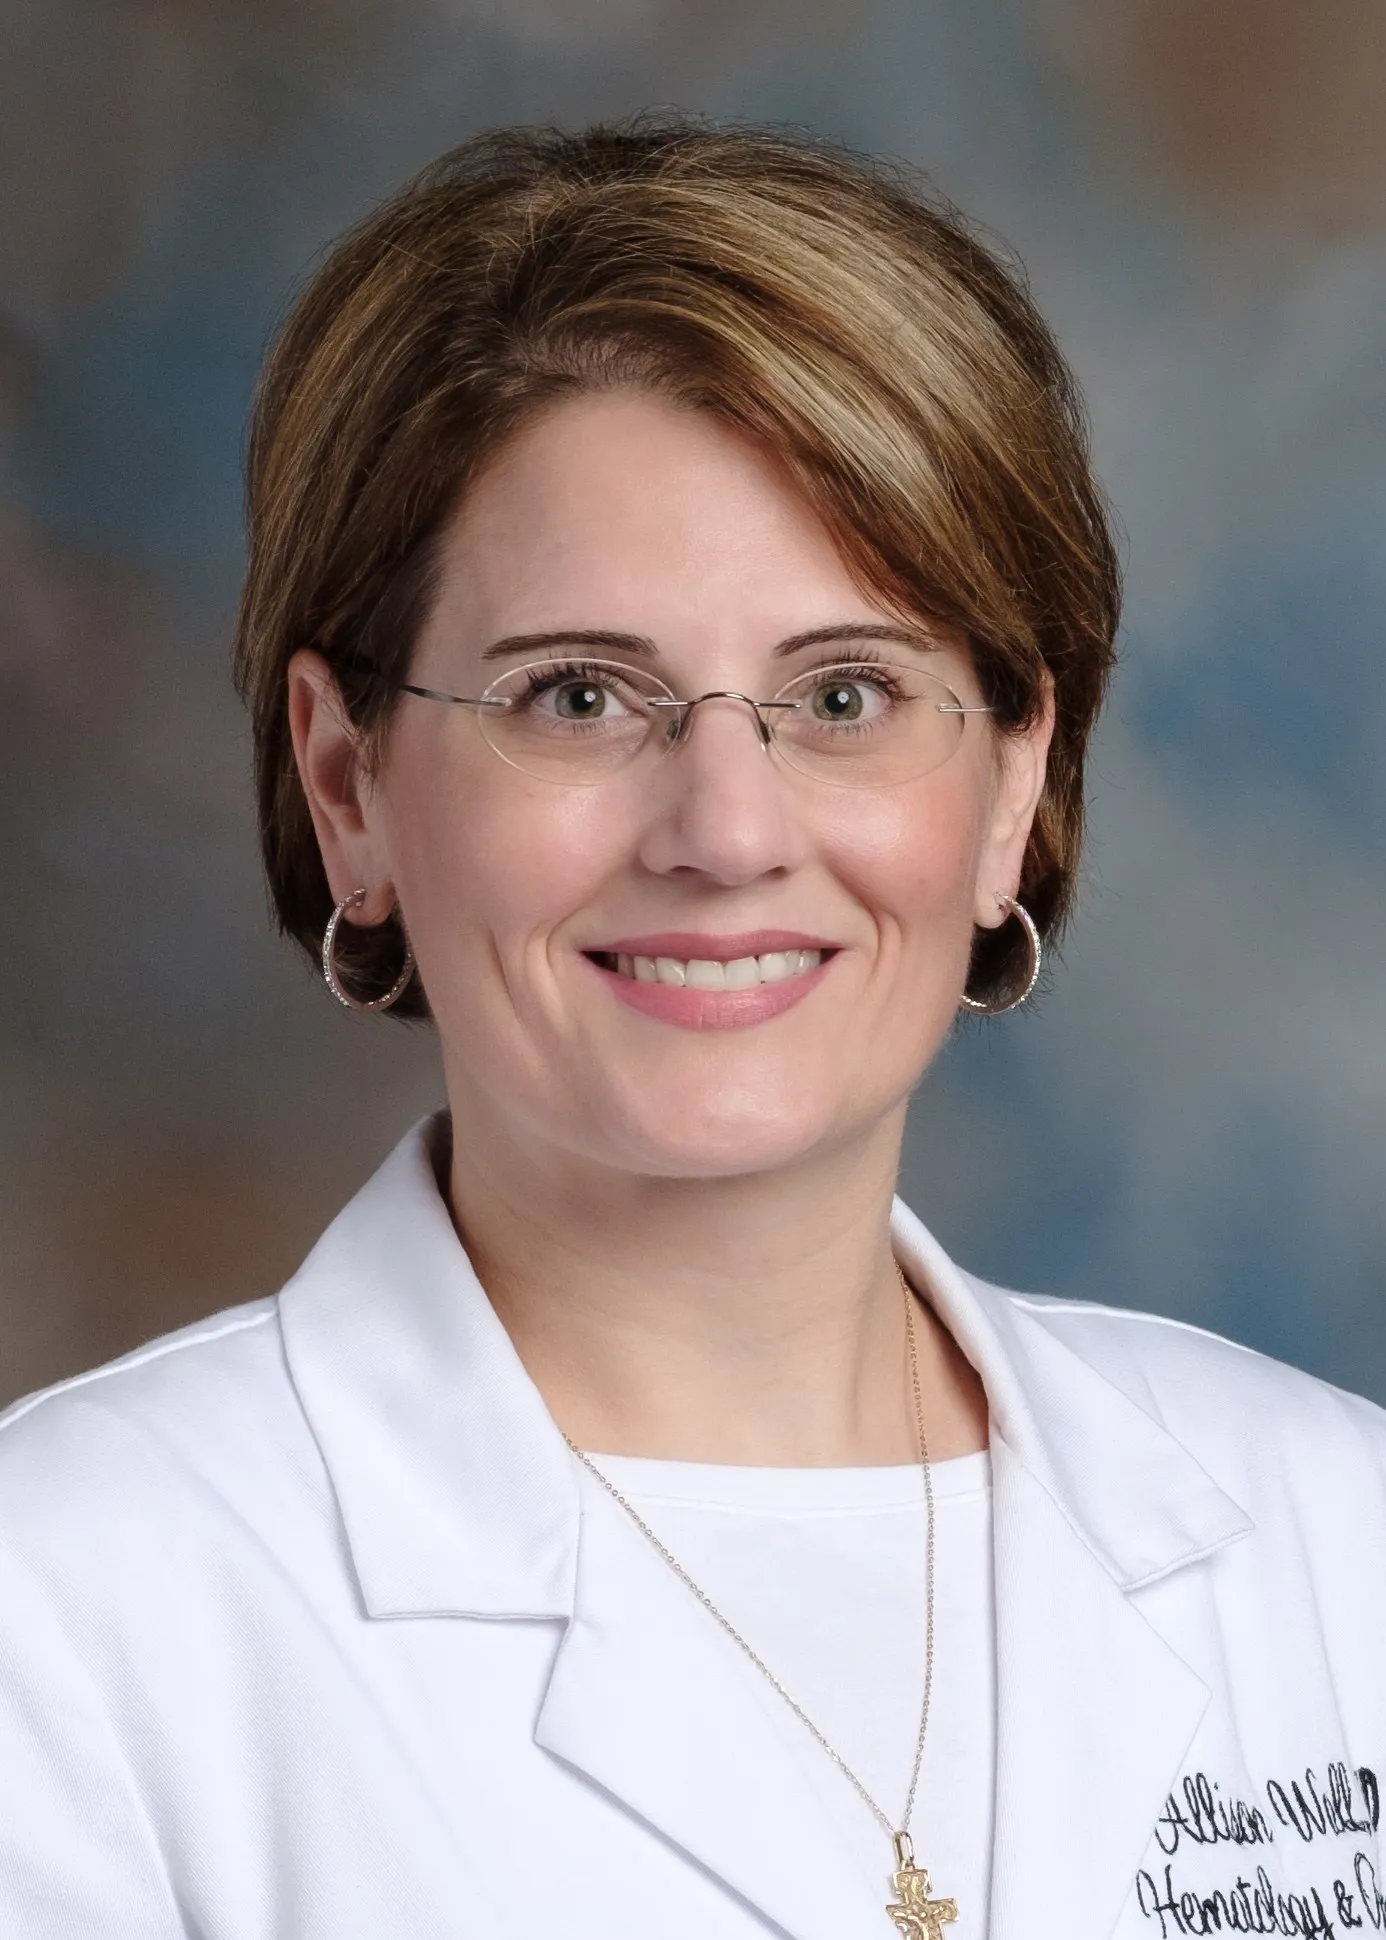 Dr. Allison Wall, MD